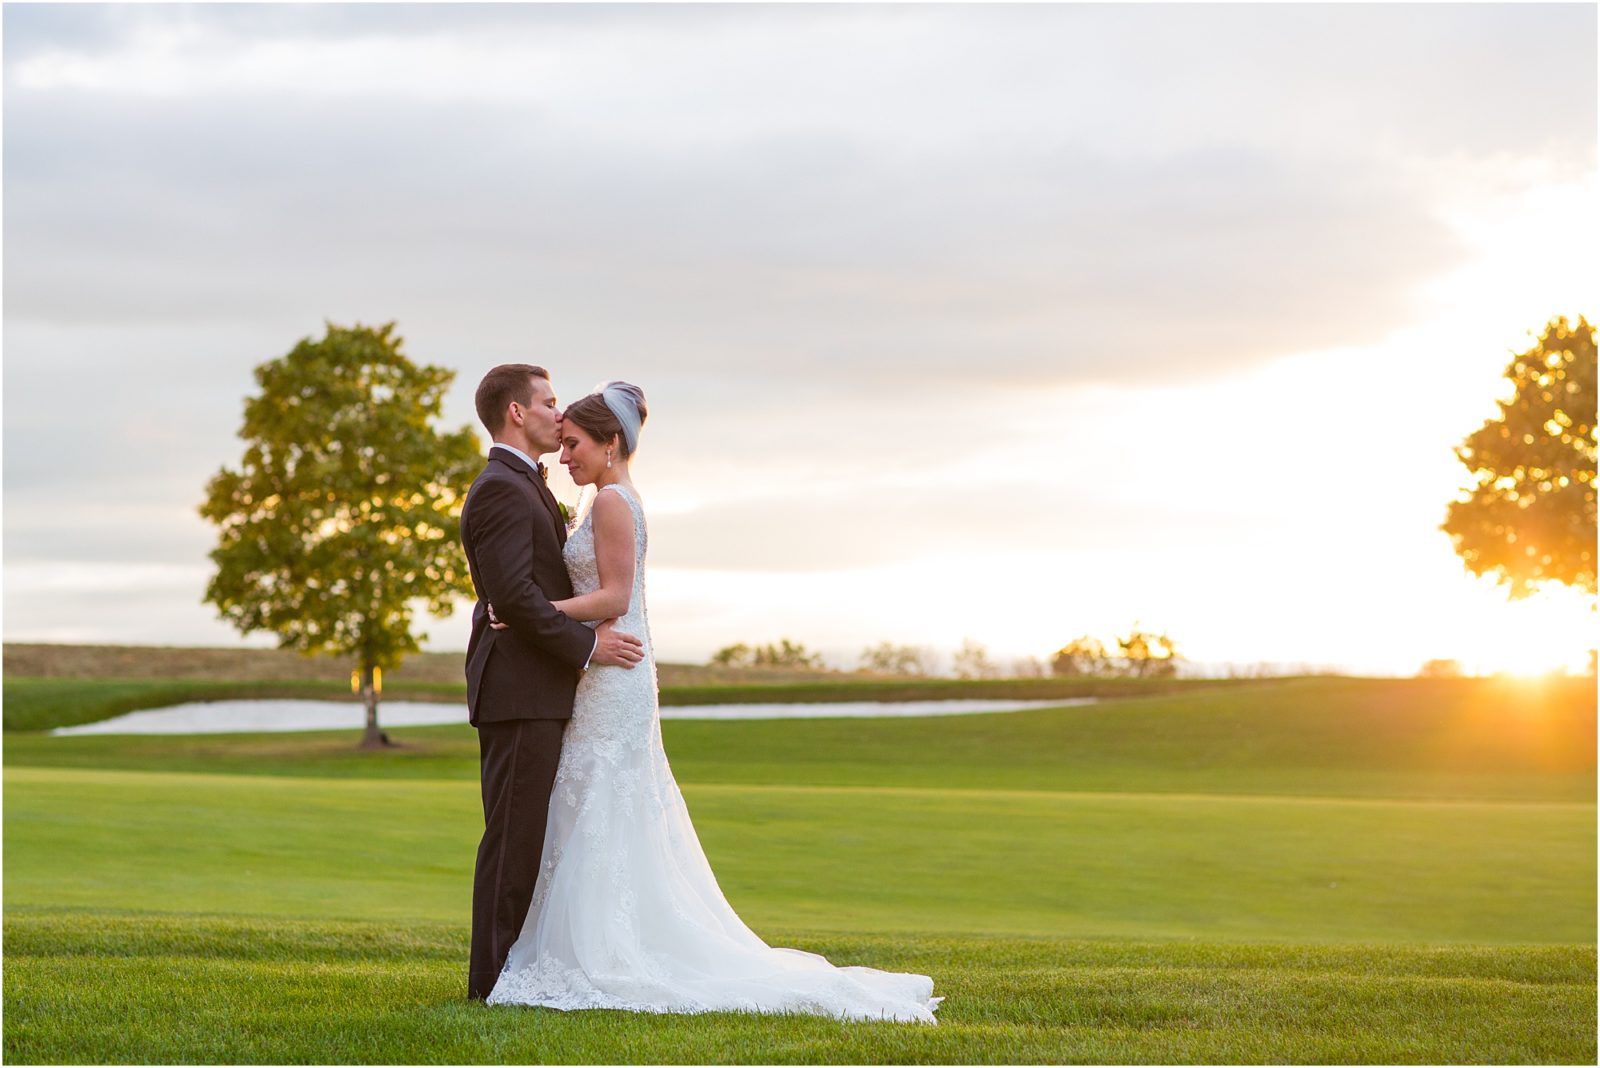 NJ wedding venues with the best property